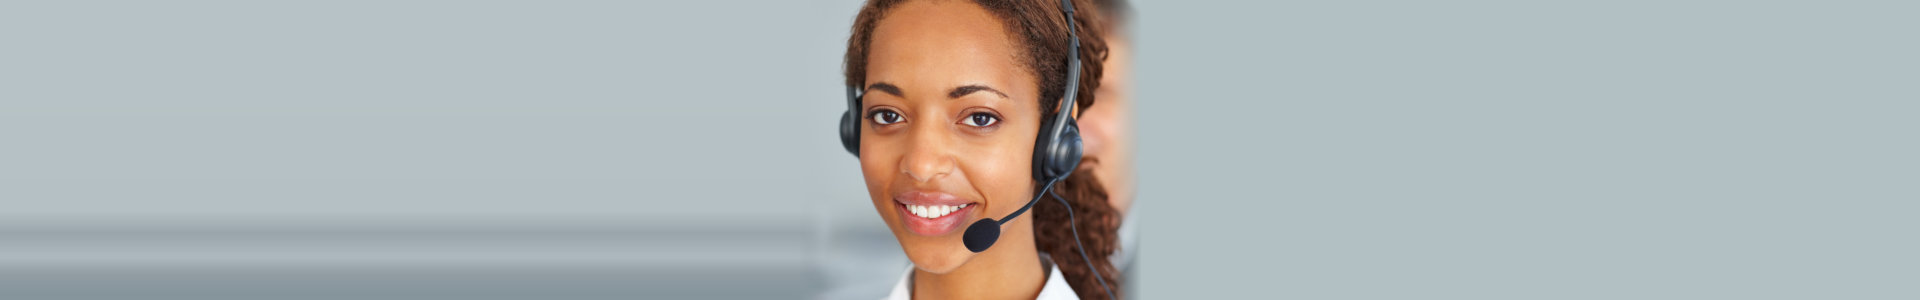 woman working as a costumer service